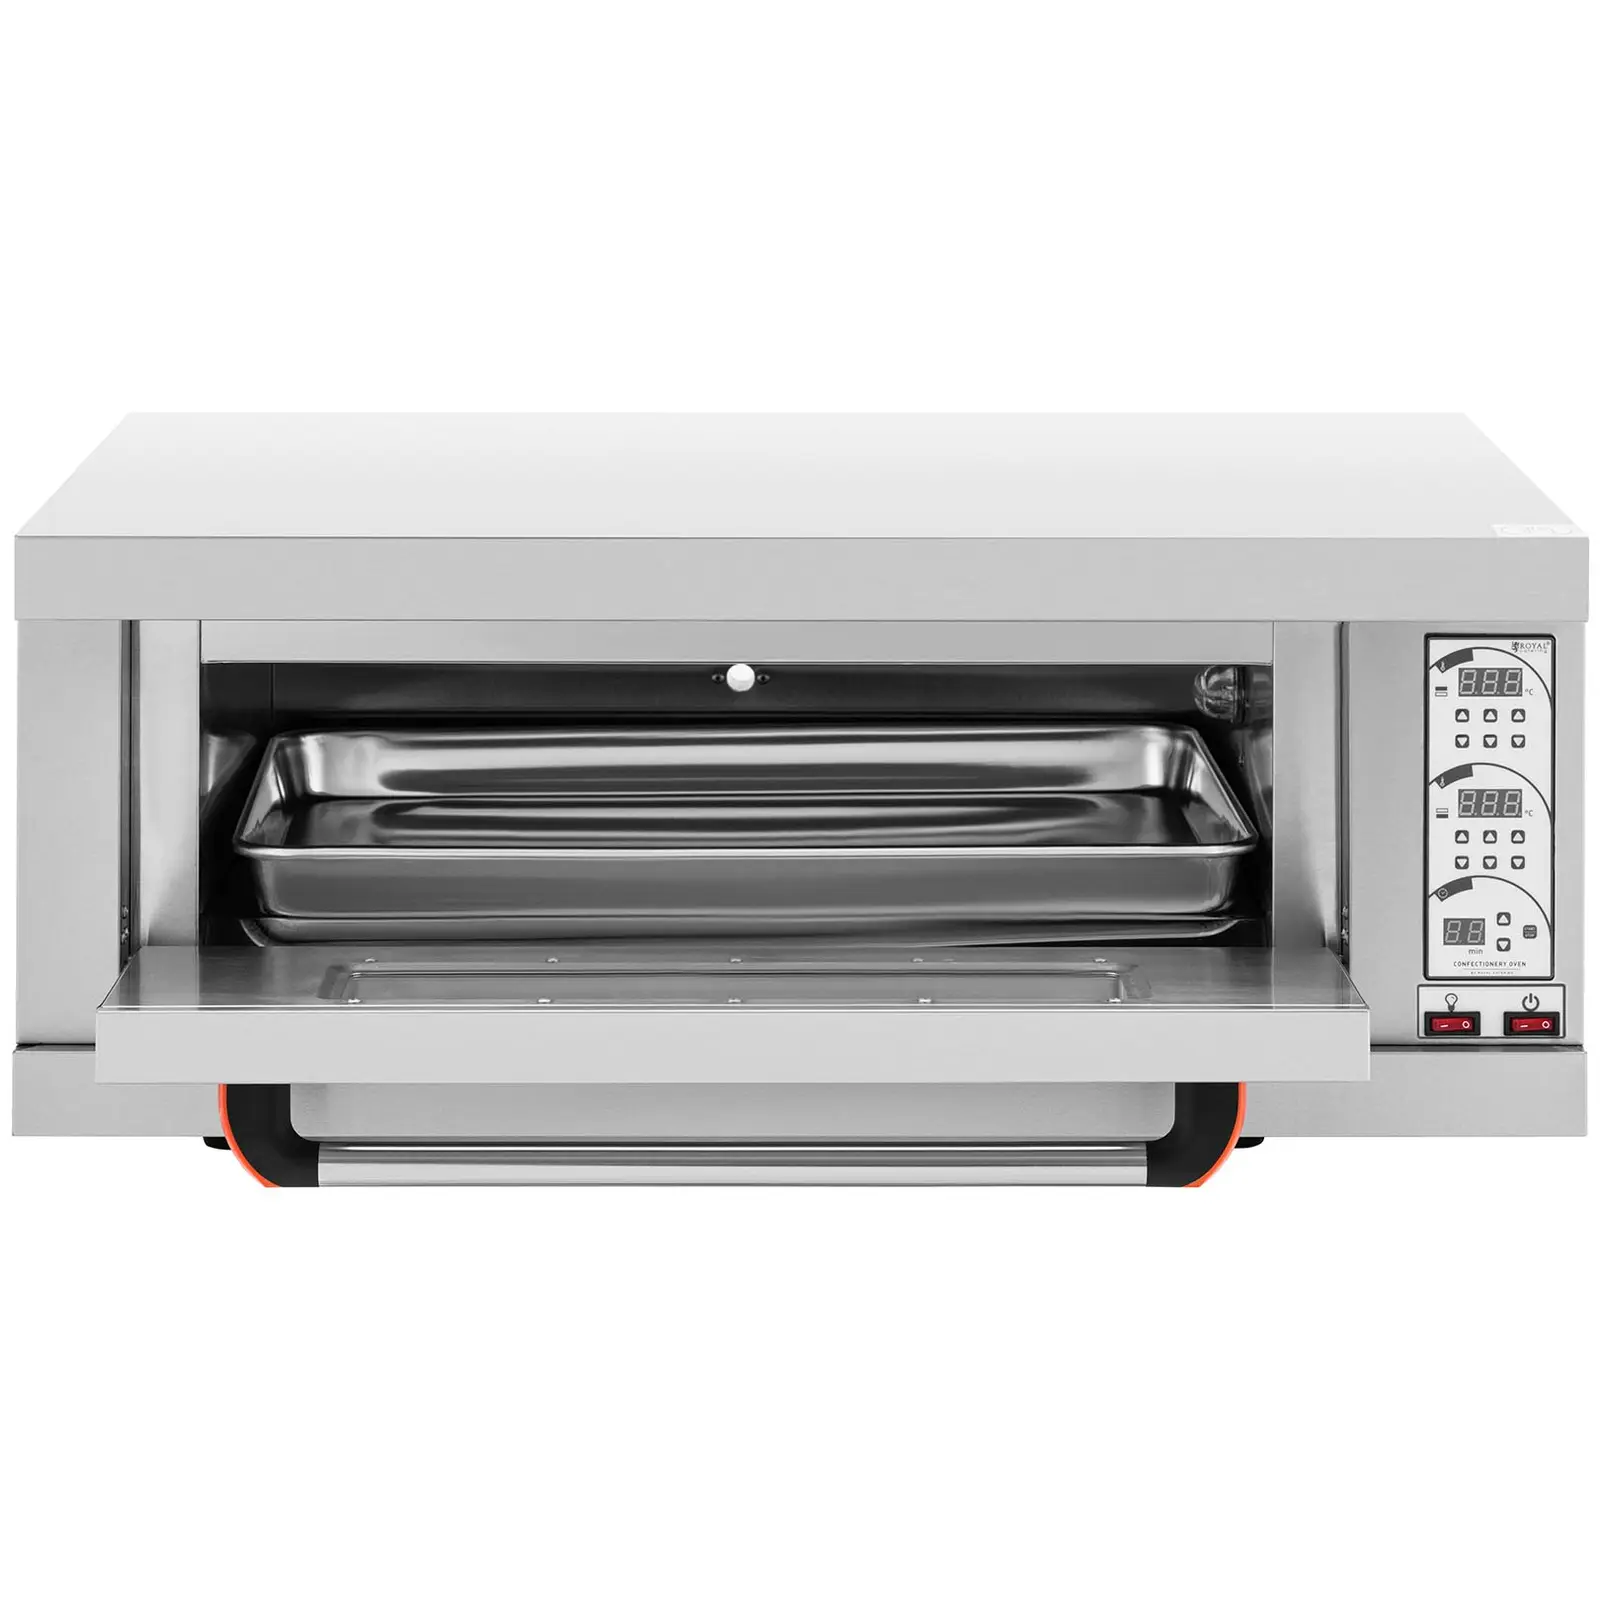 Outlet Piec do pizzy - 1 komora - 3200 W - timer - Royal Catering